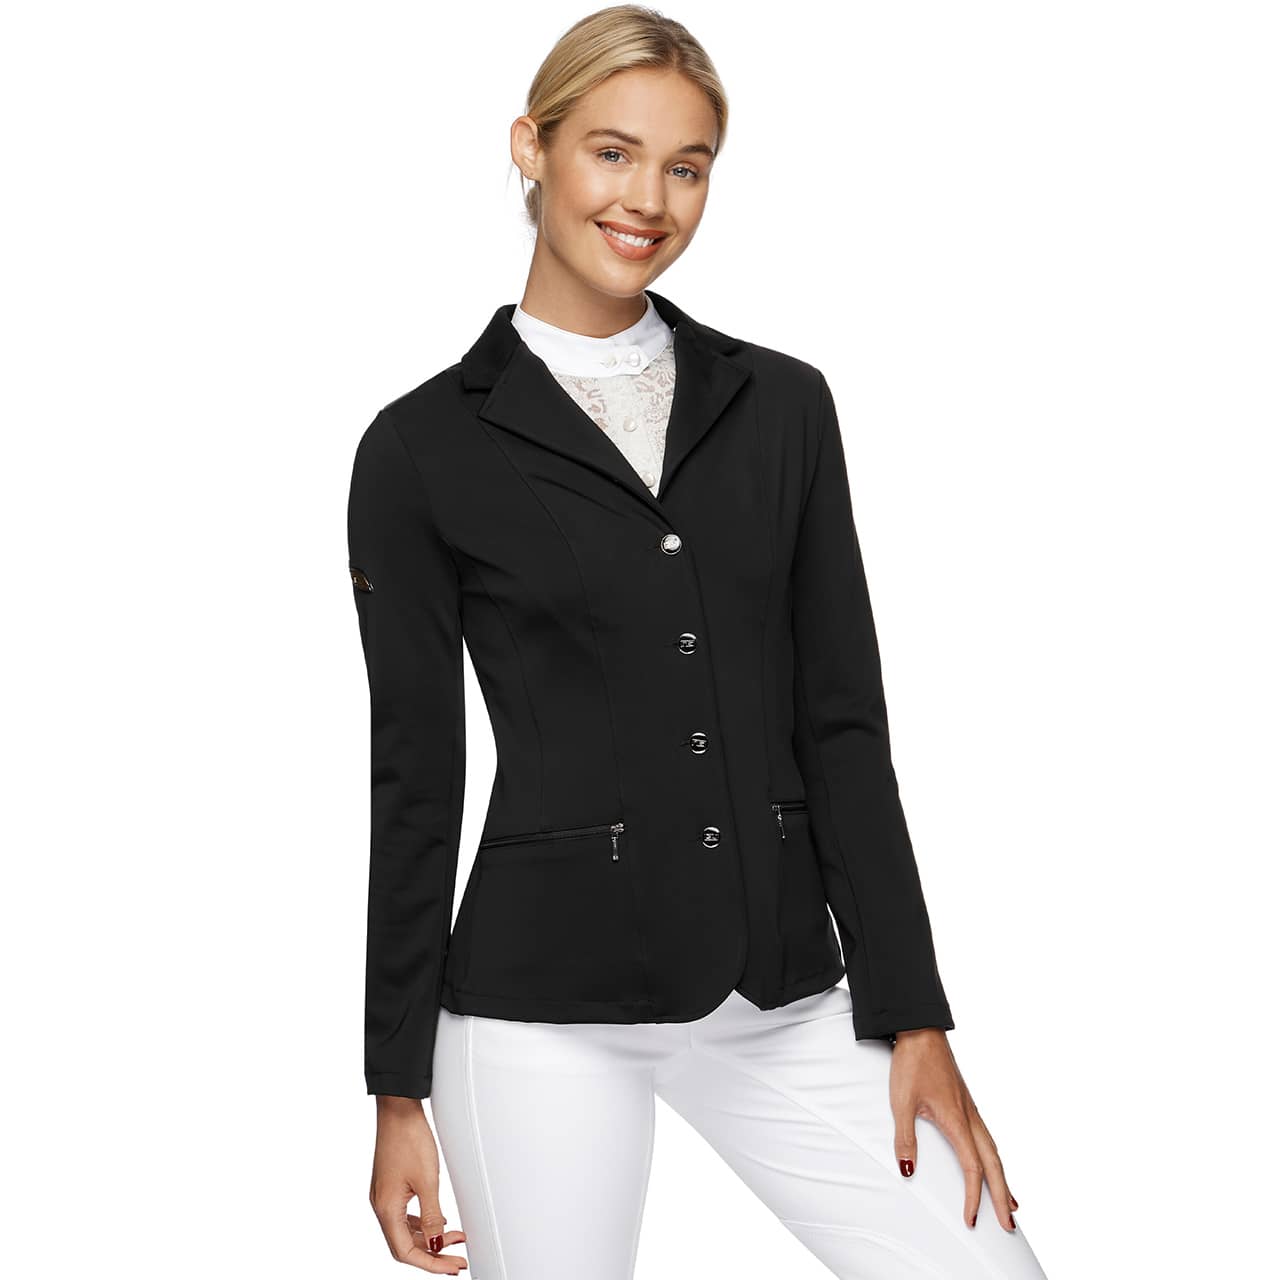 Emcee Evita Show Jacket-Southern Sport Horses-The Equestrian